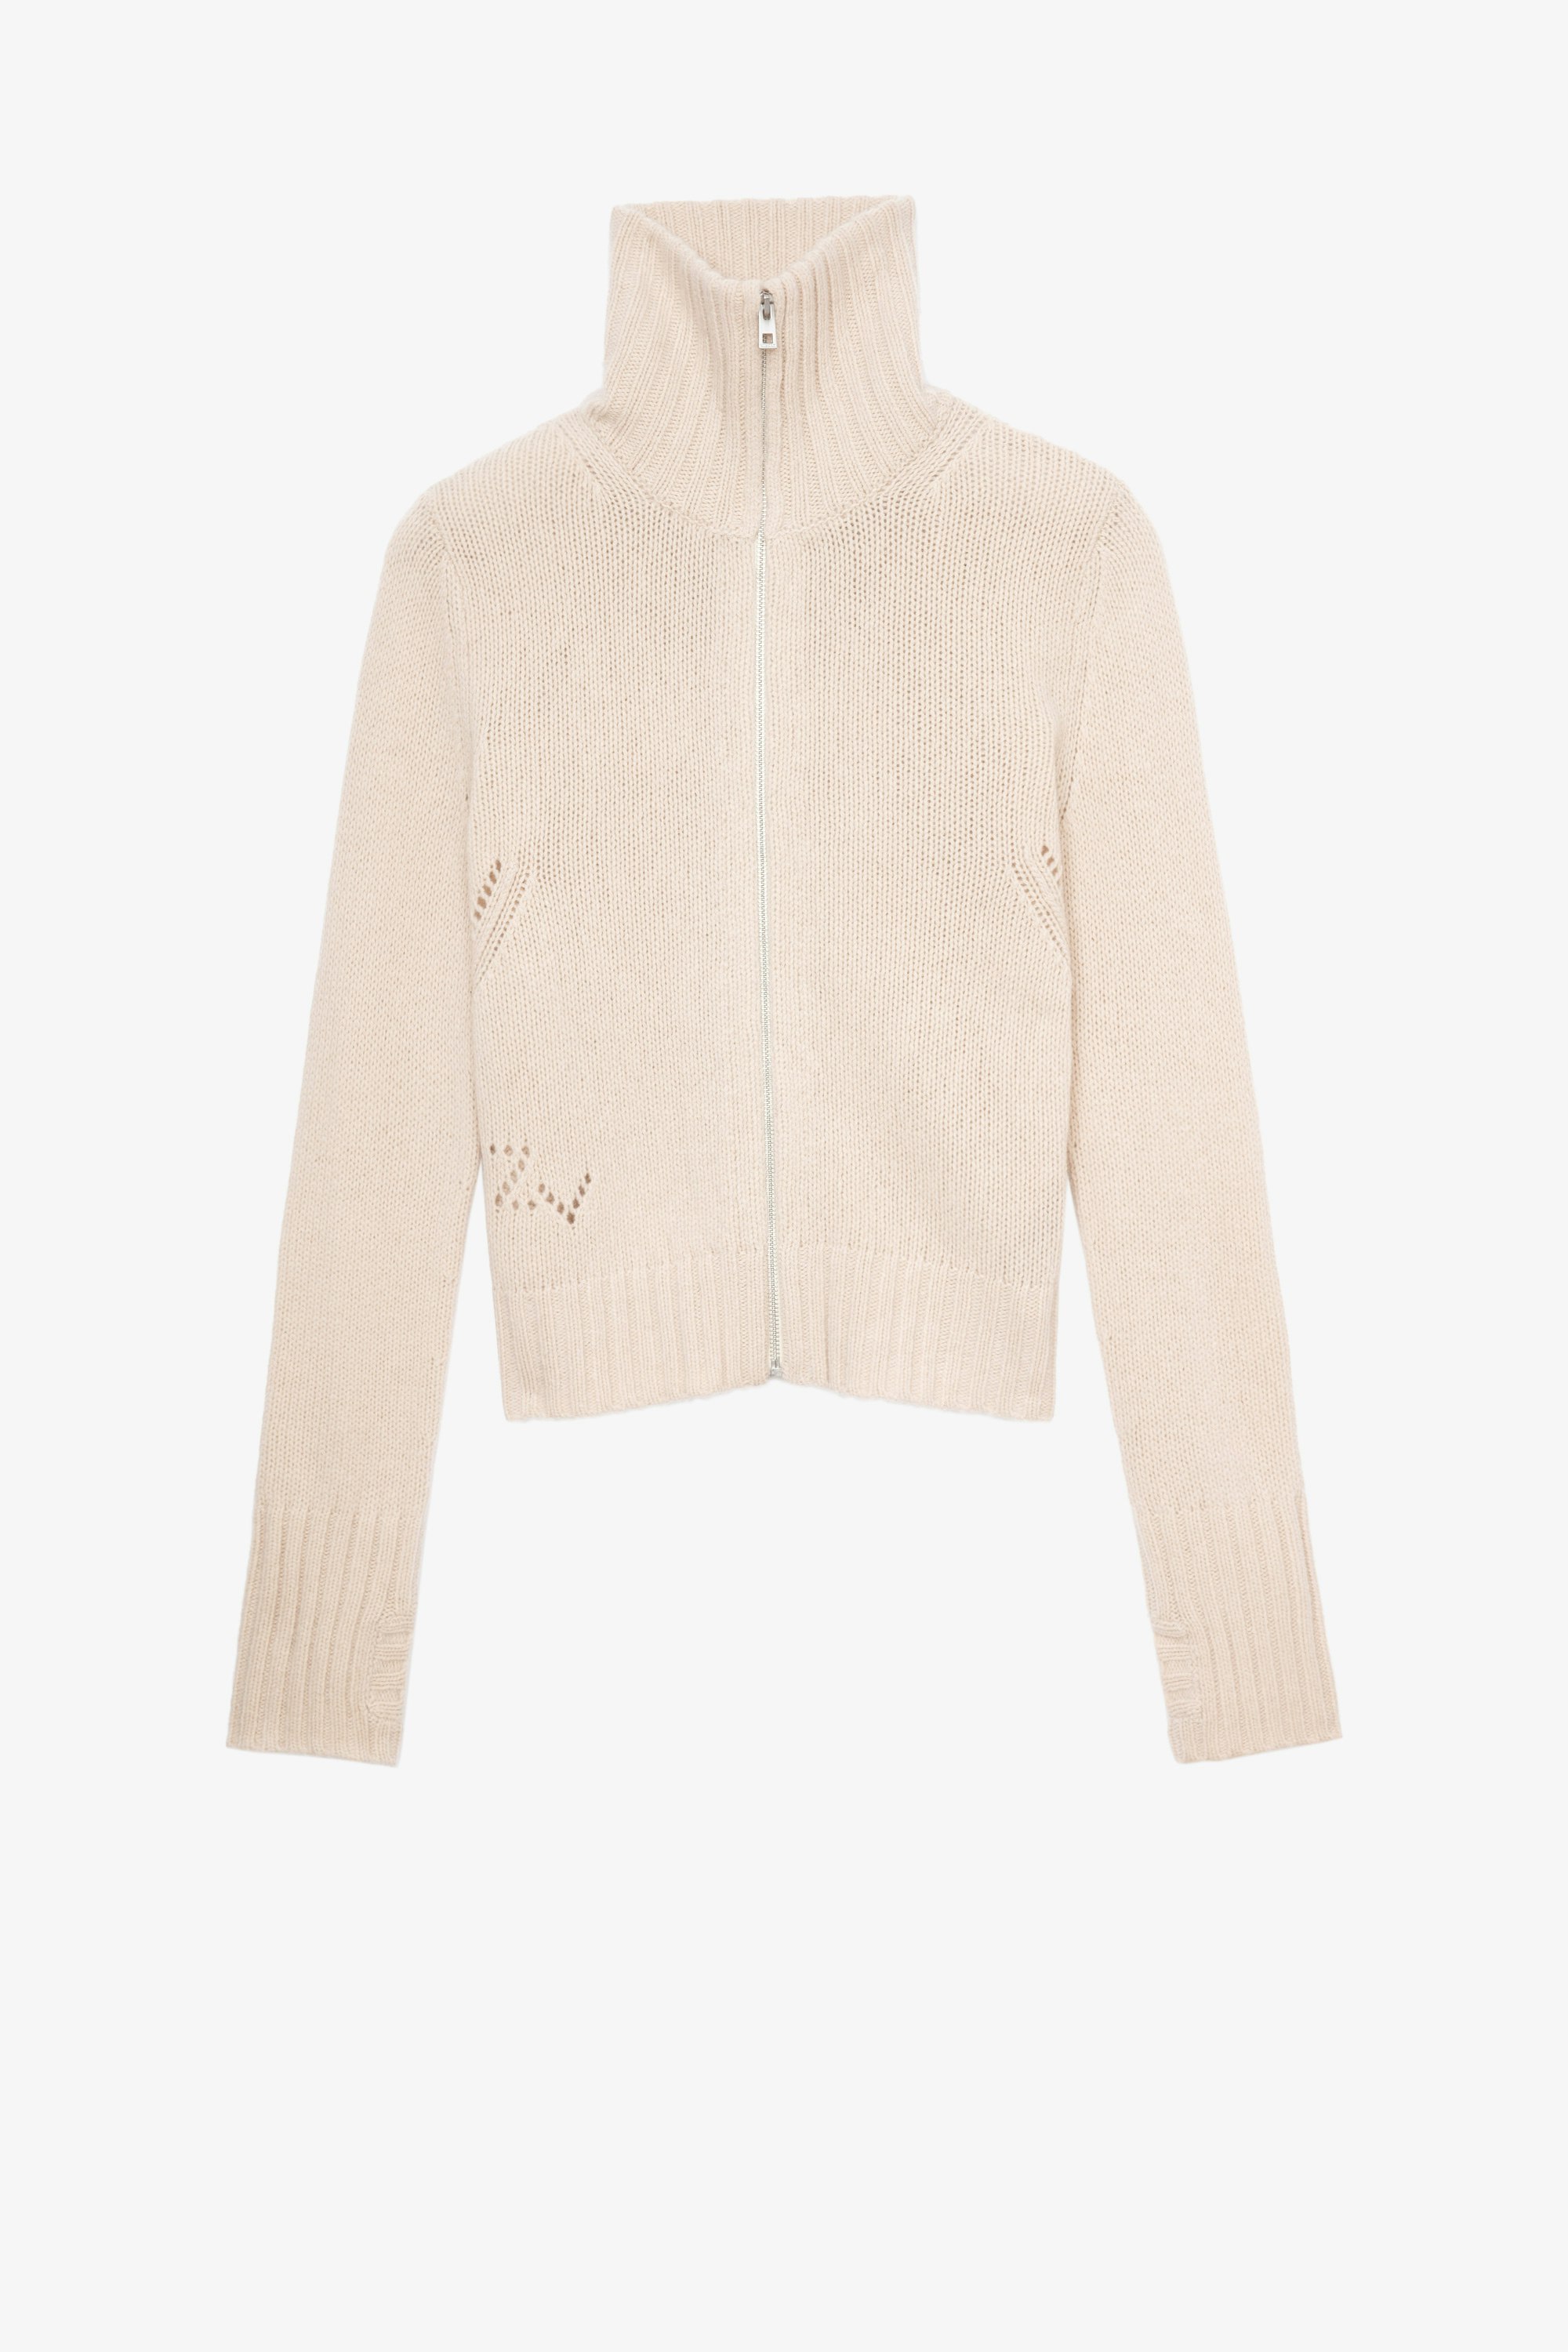 Gilda Lead カーディガン Women’s beige knit zip-up cardigan with stand collar and flocking on the back